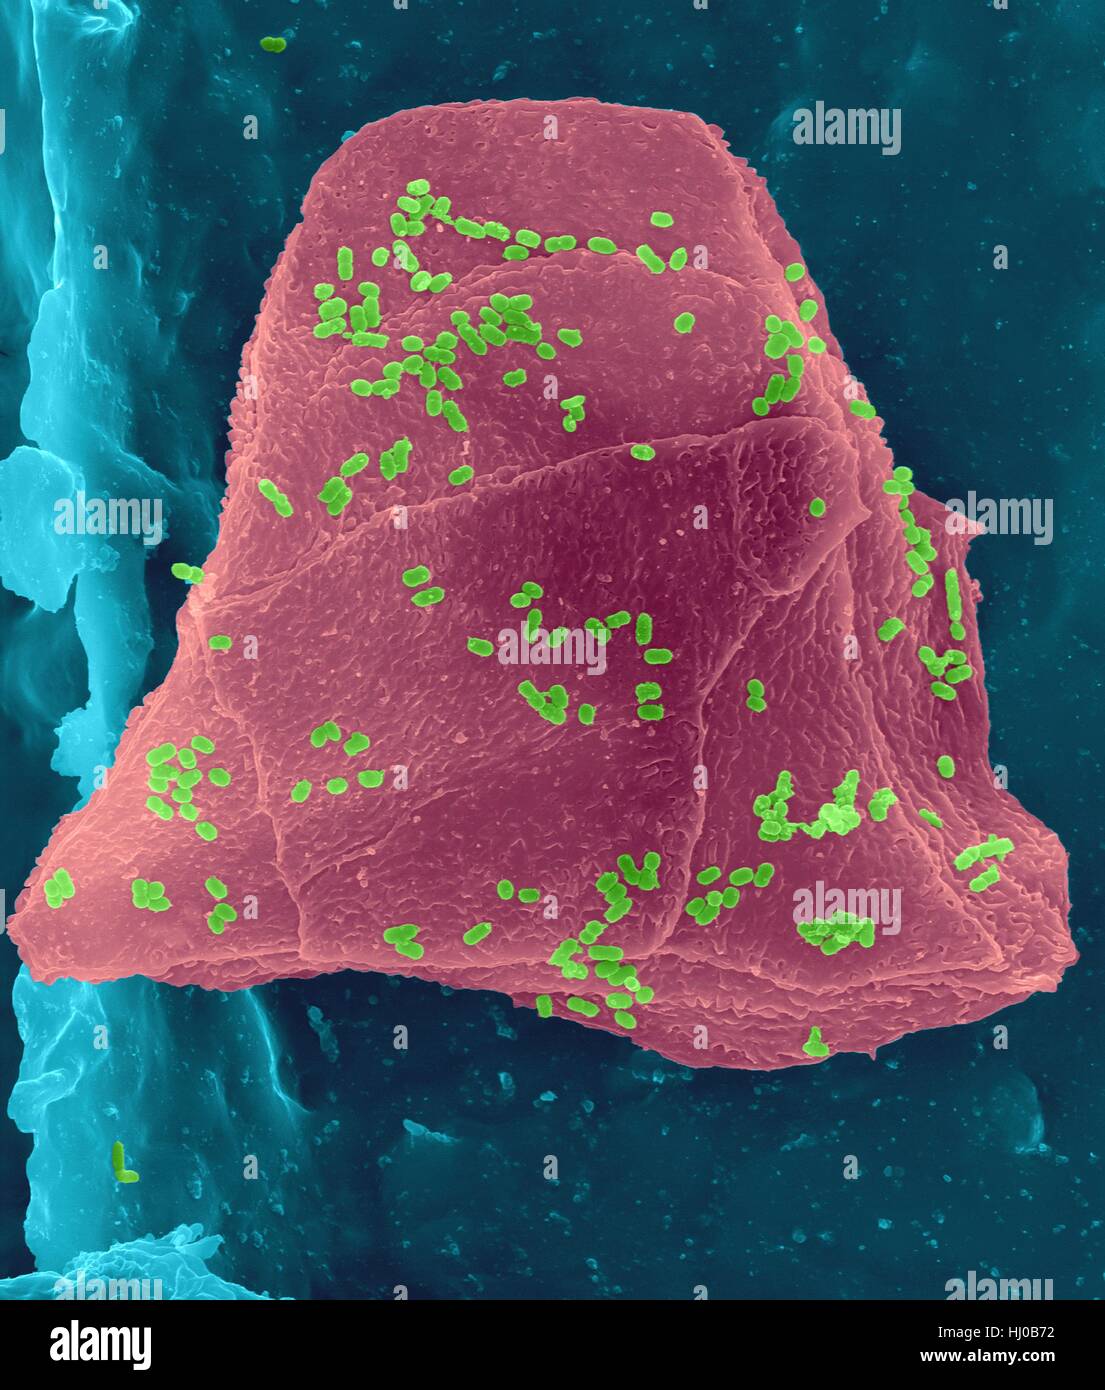 Used wax dental floss with cheek cells (purple) bacteria (green) on dental floss fibres (blue),coloured scanning electron micrograph (SEM).Cheek cells often get scraped from inside of your mouth when flossing your teeth.Numerous bacteria are present as part of normal mouth flora.Bacterial plaque Stock Photo